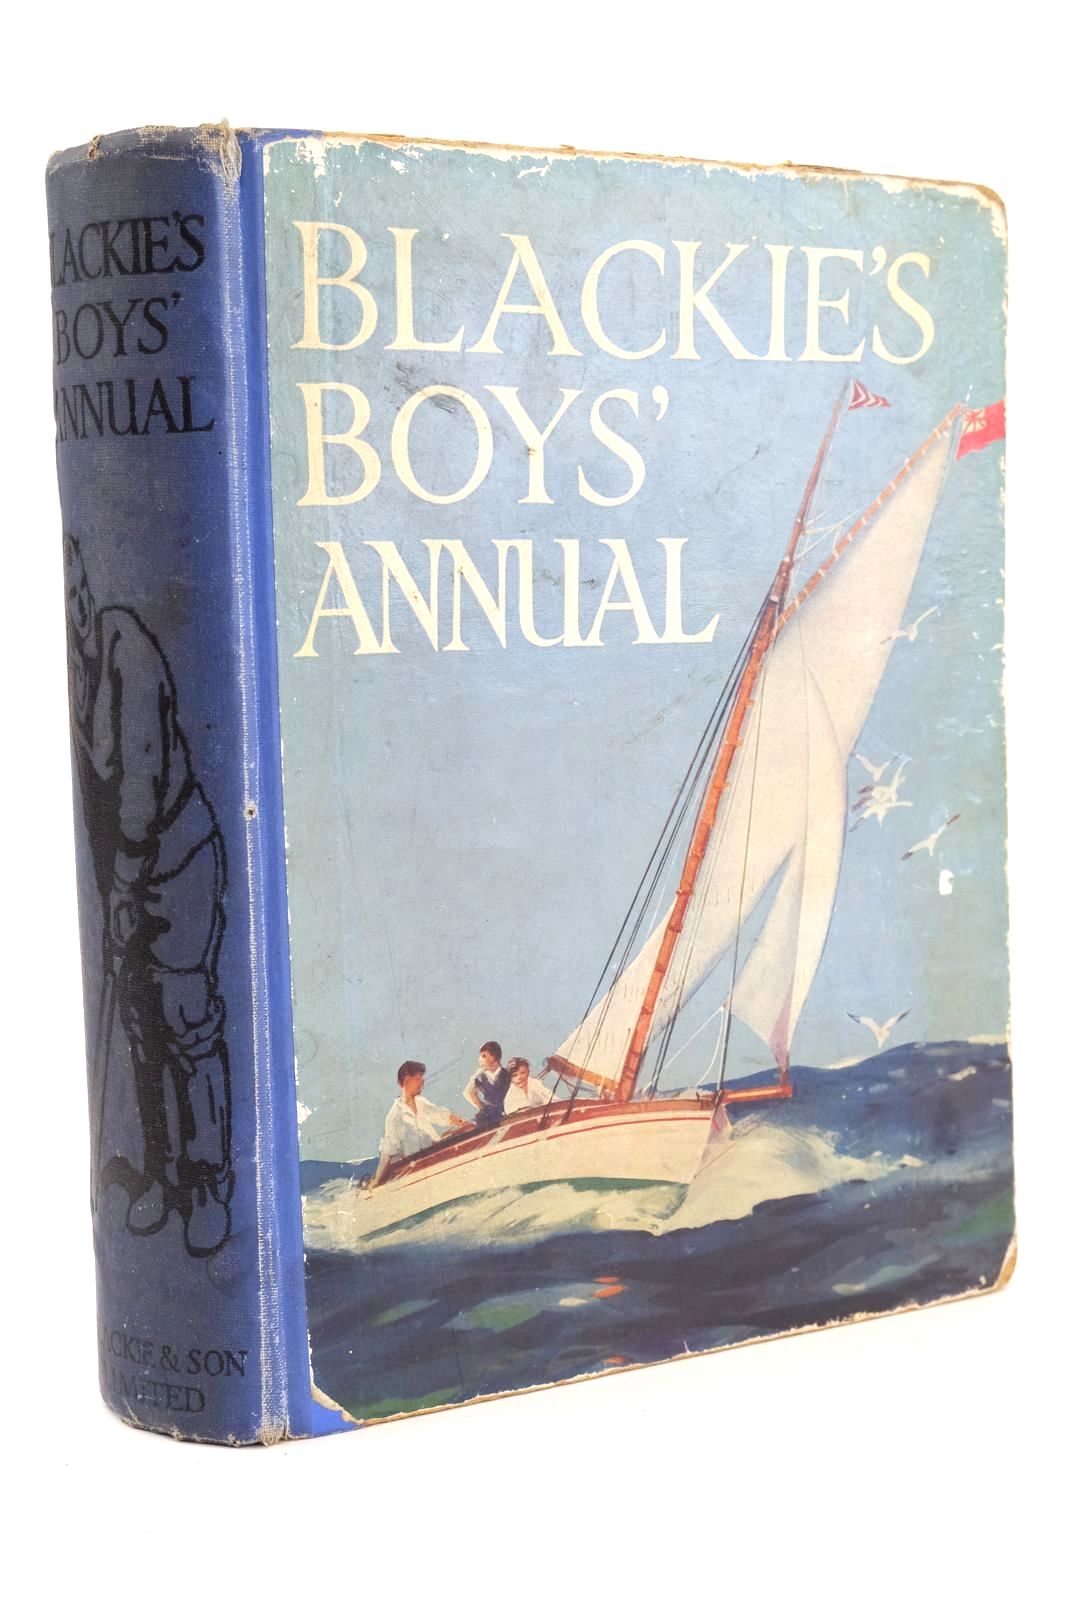 Photo of BLACKIE'S BOYS' ANNUAL 1924 written by Cleaver, Hylton Batten, H. Mortimer Gibson, Charles R. Westerman, Percy F. Talbot, E. et al, illustrated by Brock, H.M. Browne, Gordon Millar, H.R. et al., published by Blackie &amp; Son Ltd. (STOCK CODE: 1324775)  for sale by Stella & Rose's Books